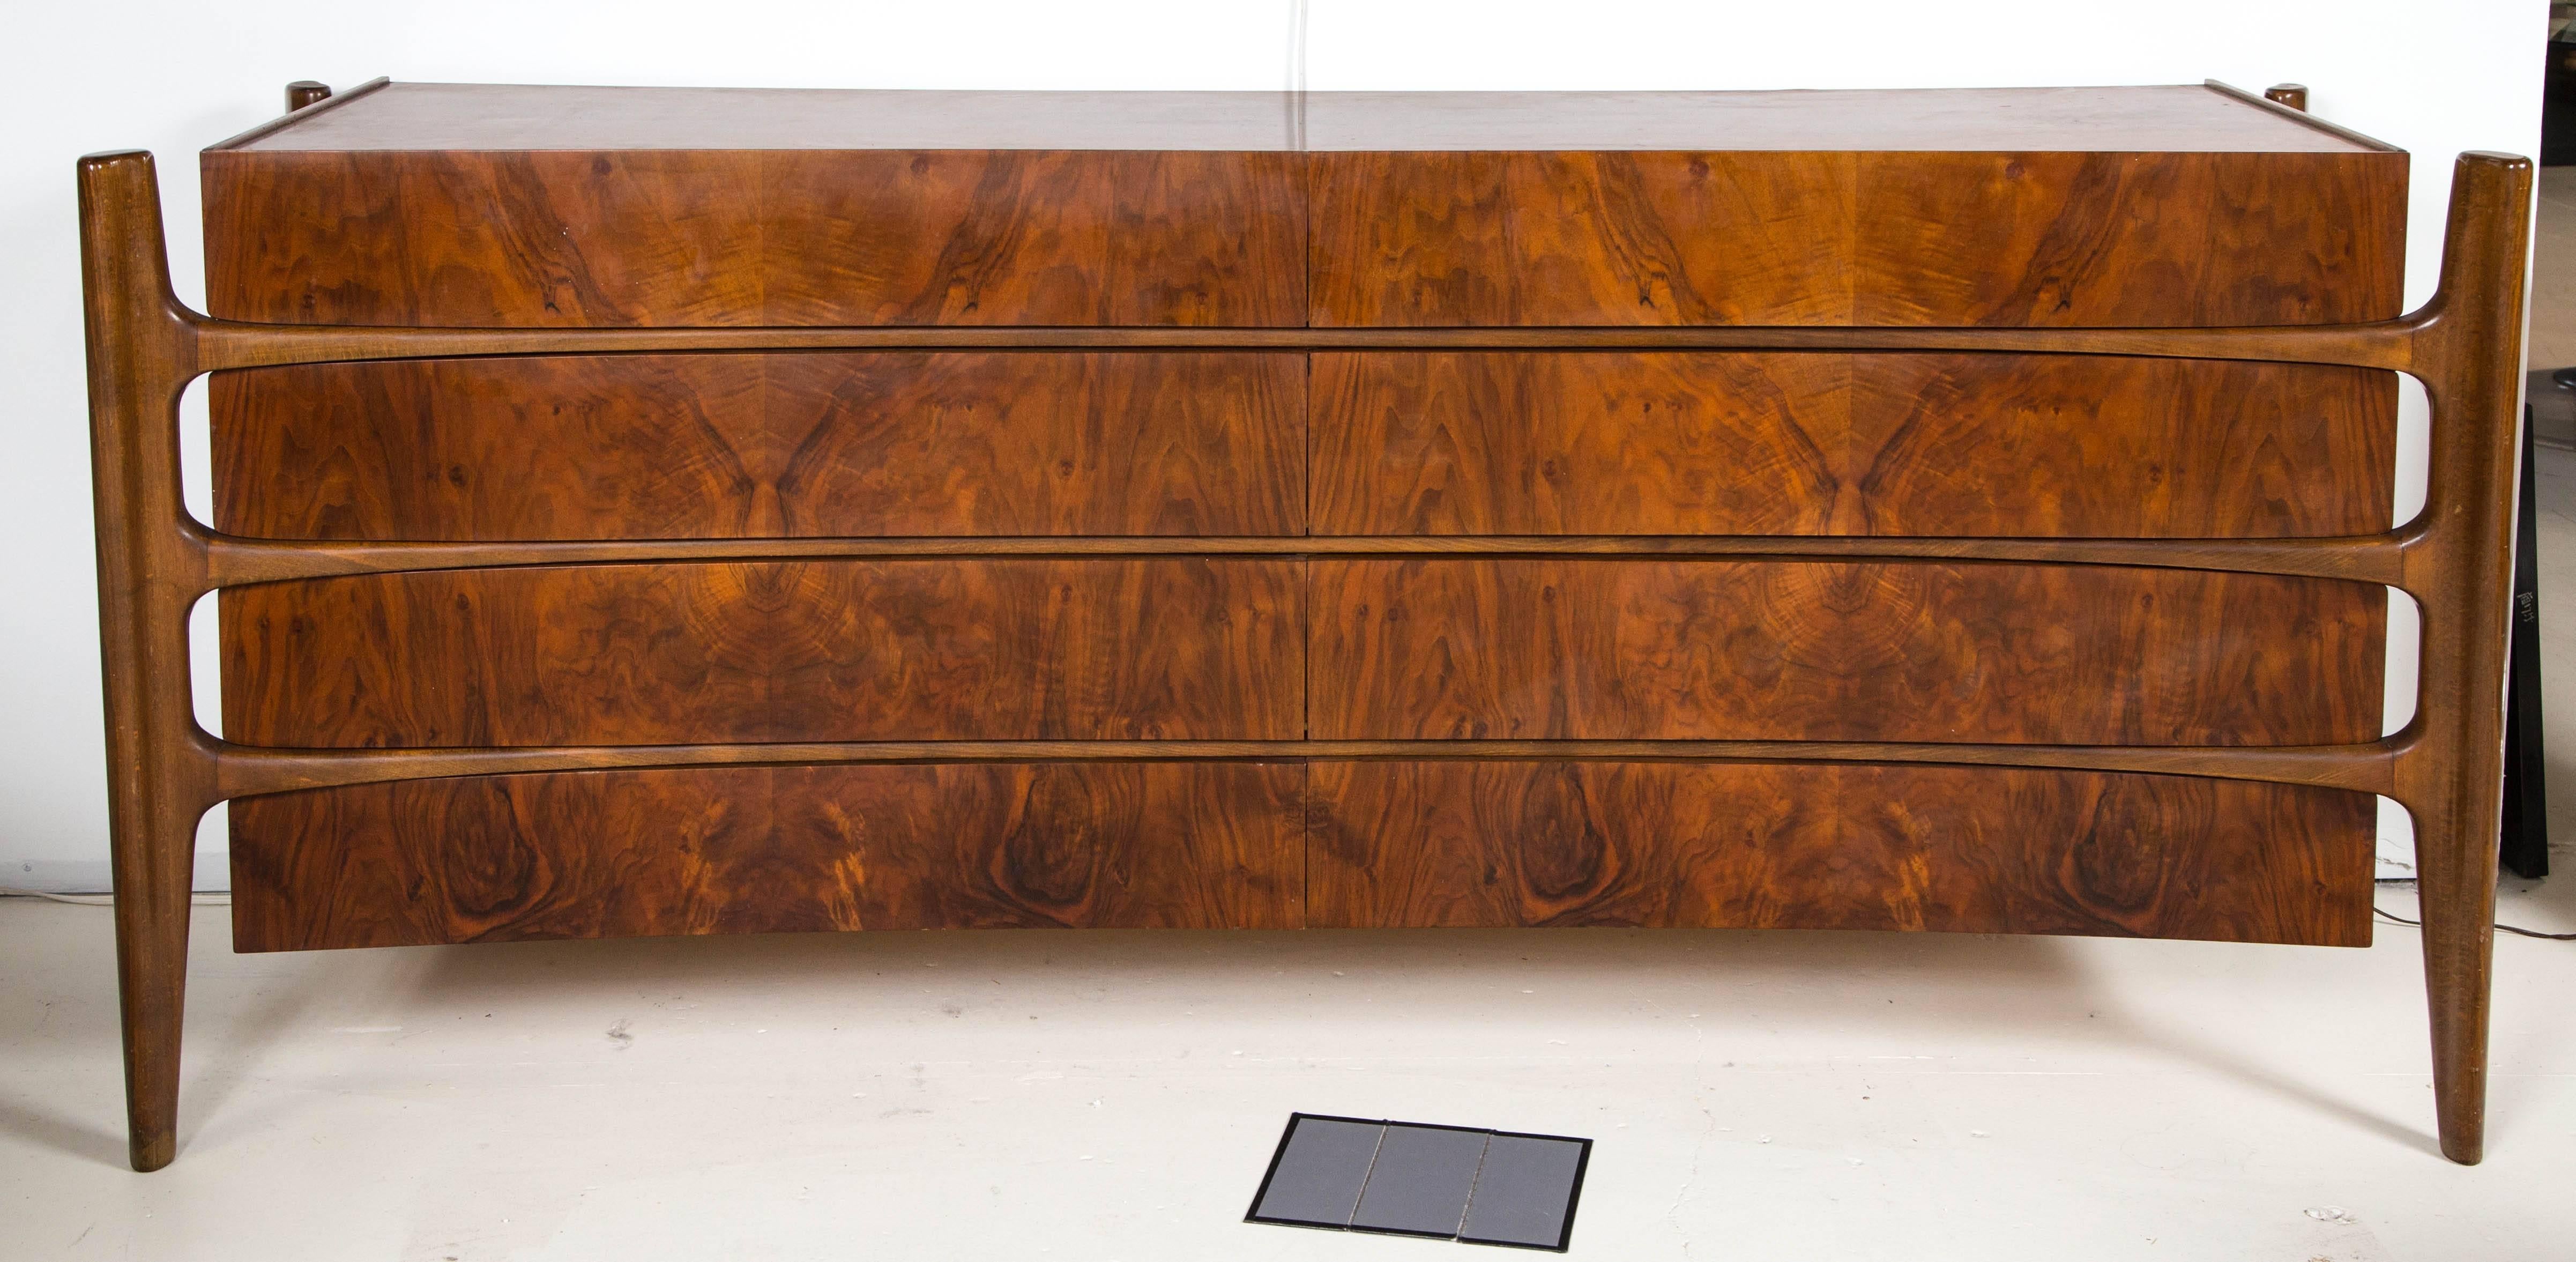 Four-drawer chest by William Hinn for Urban Furniture Sweden, 1950s. Beautiful curved chest or dresser. This piece shows an exquisite organic and amorphic design.